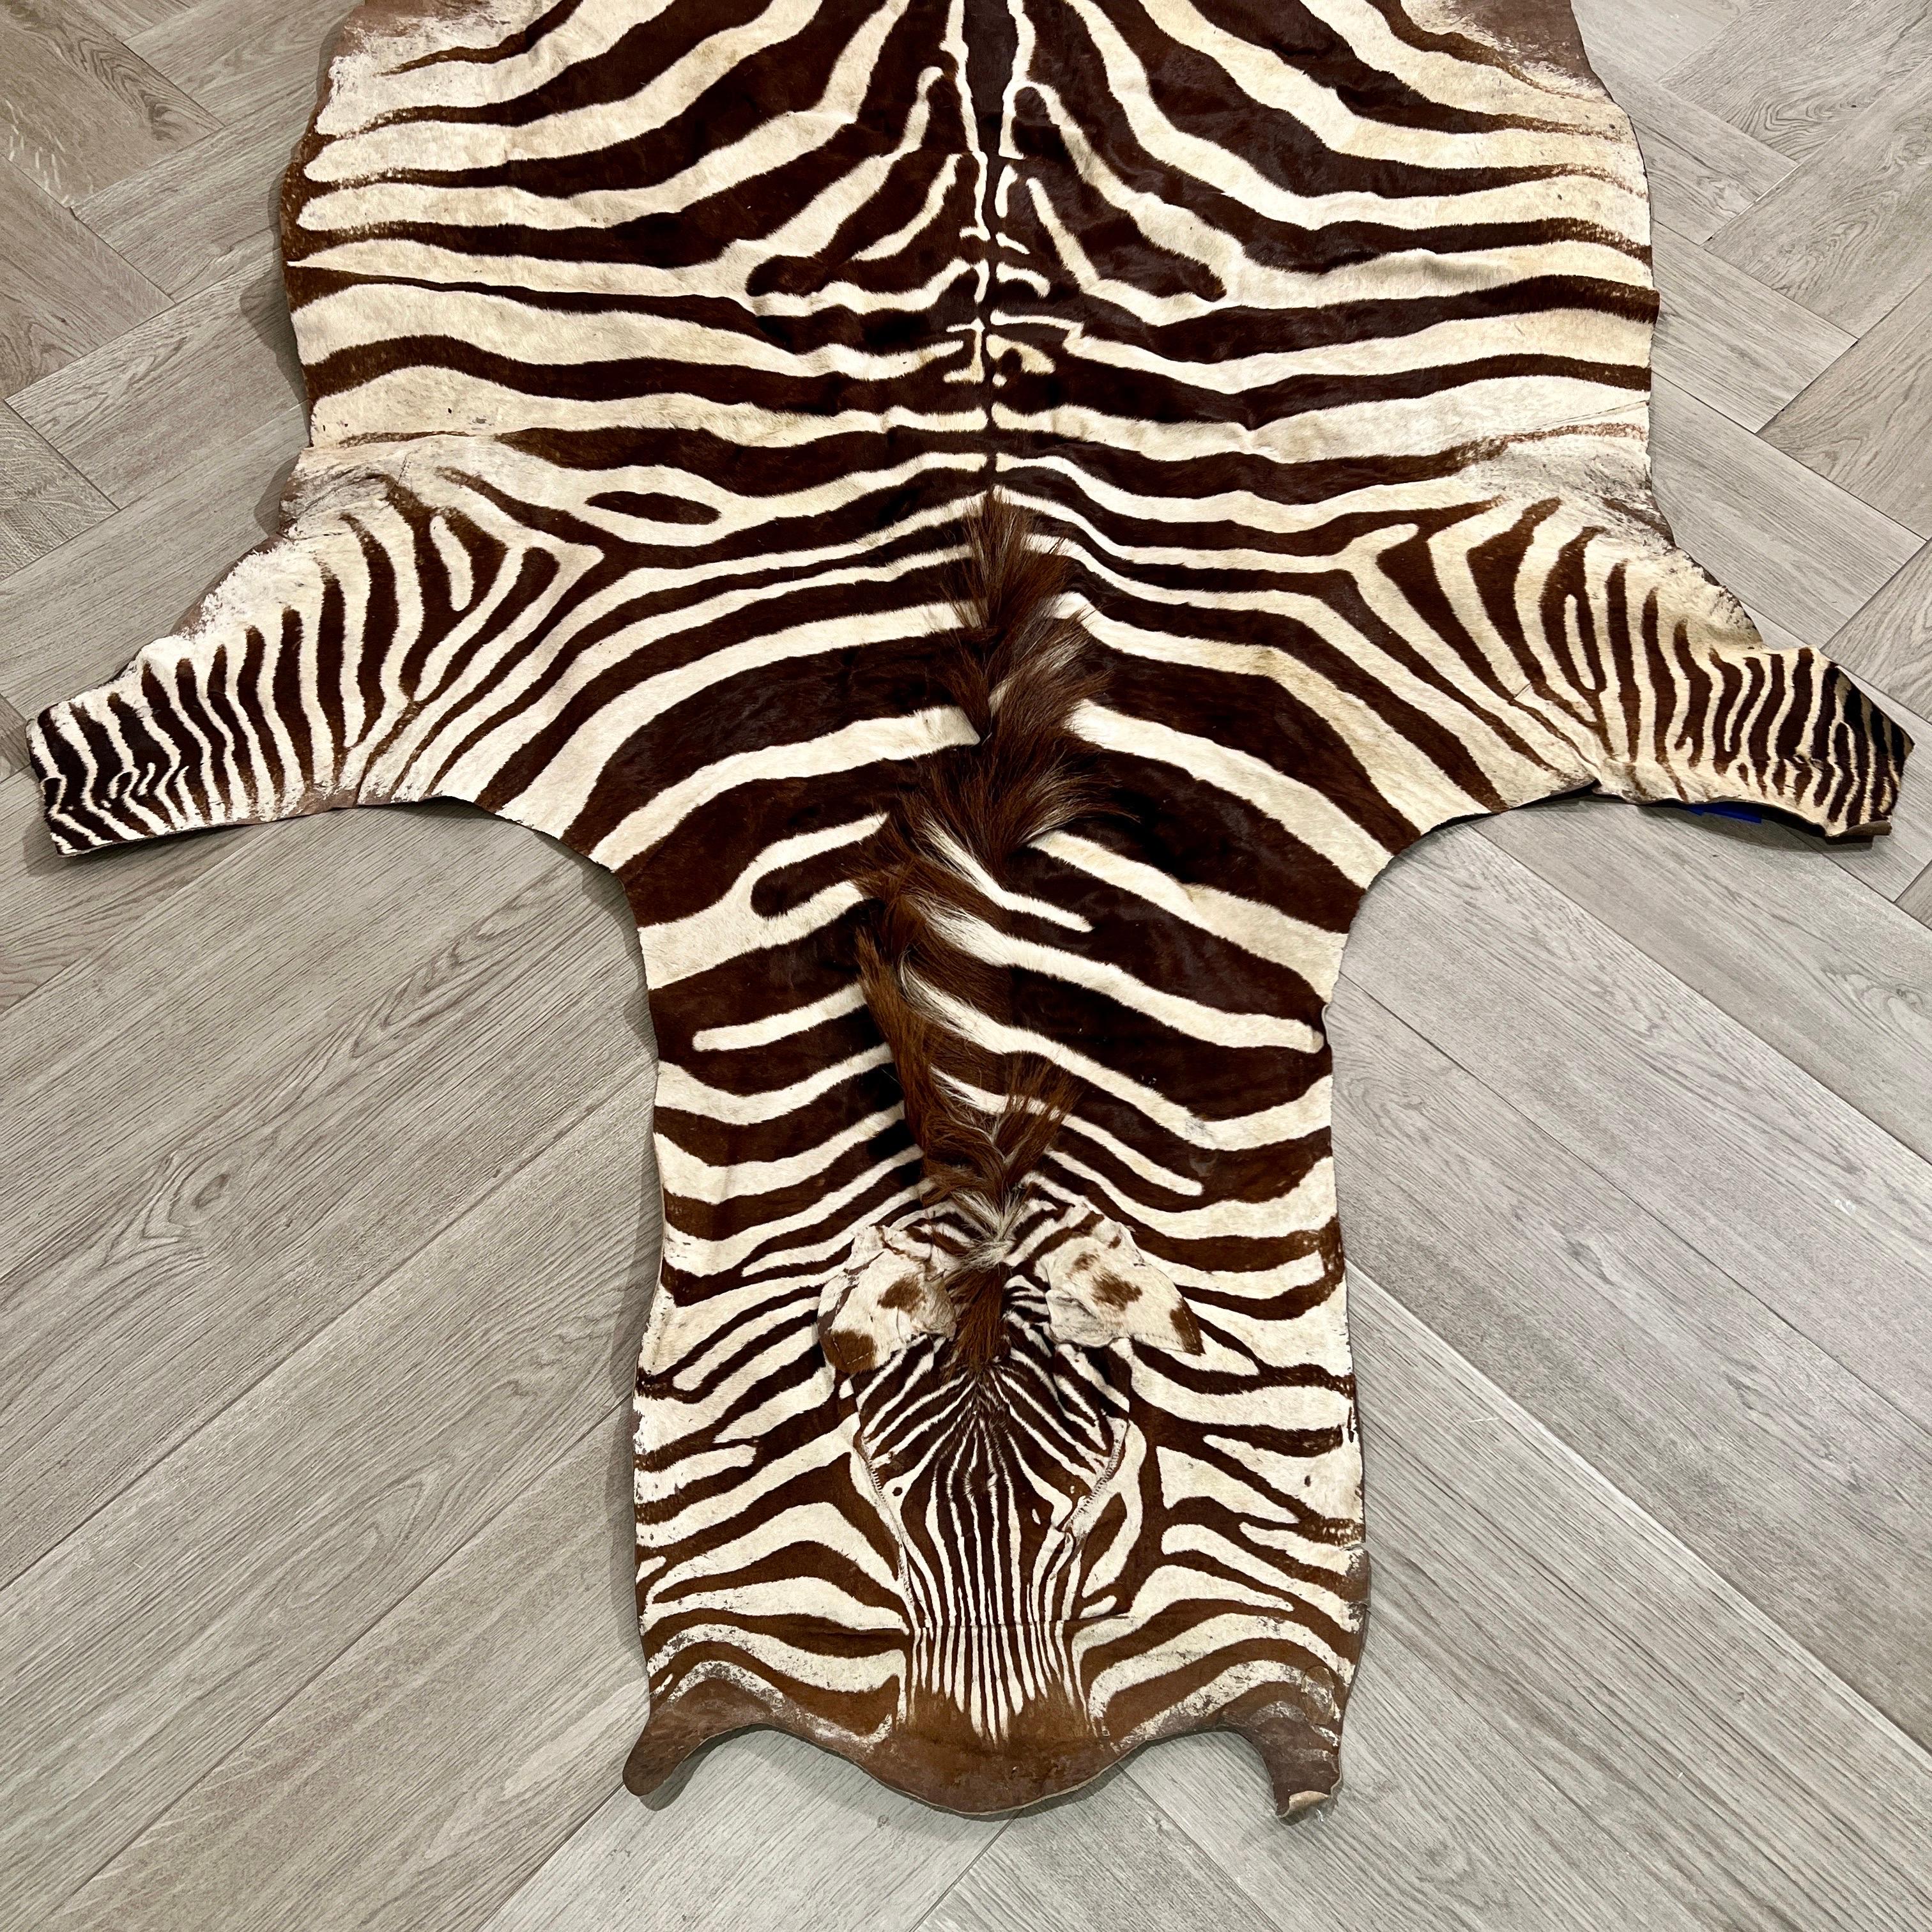 Vintage authentic zebra hide.  Can be used as a safari rug, as tapestry, or as upholstery.  In hues of cream and dark brown, the hide is in great vintage condition with only a few small areas of distress or loss.